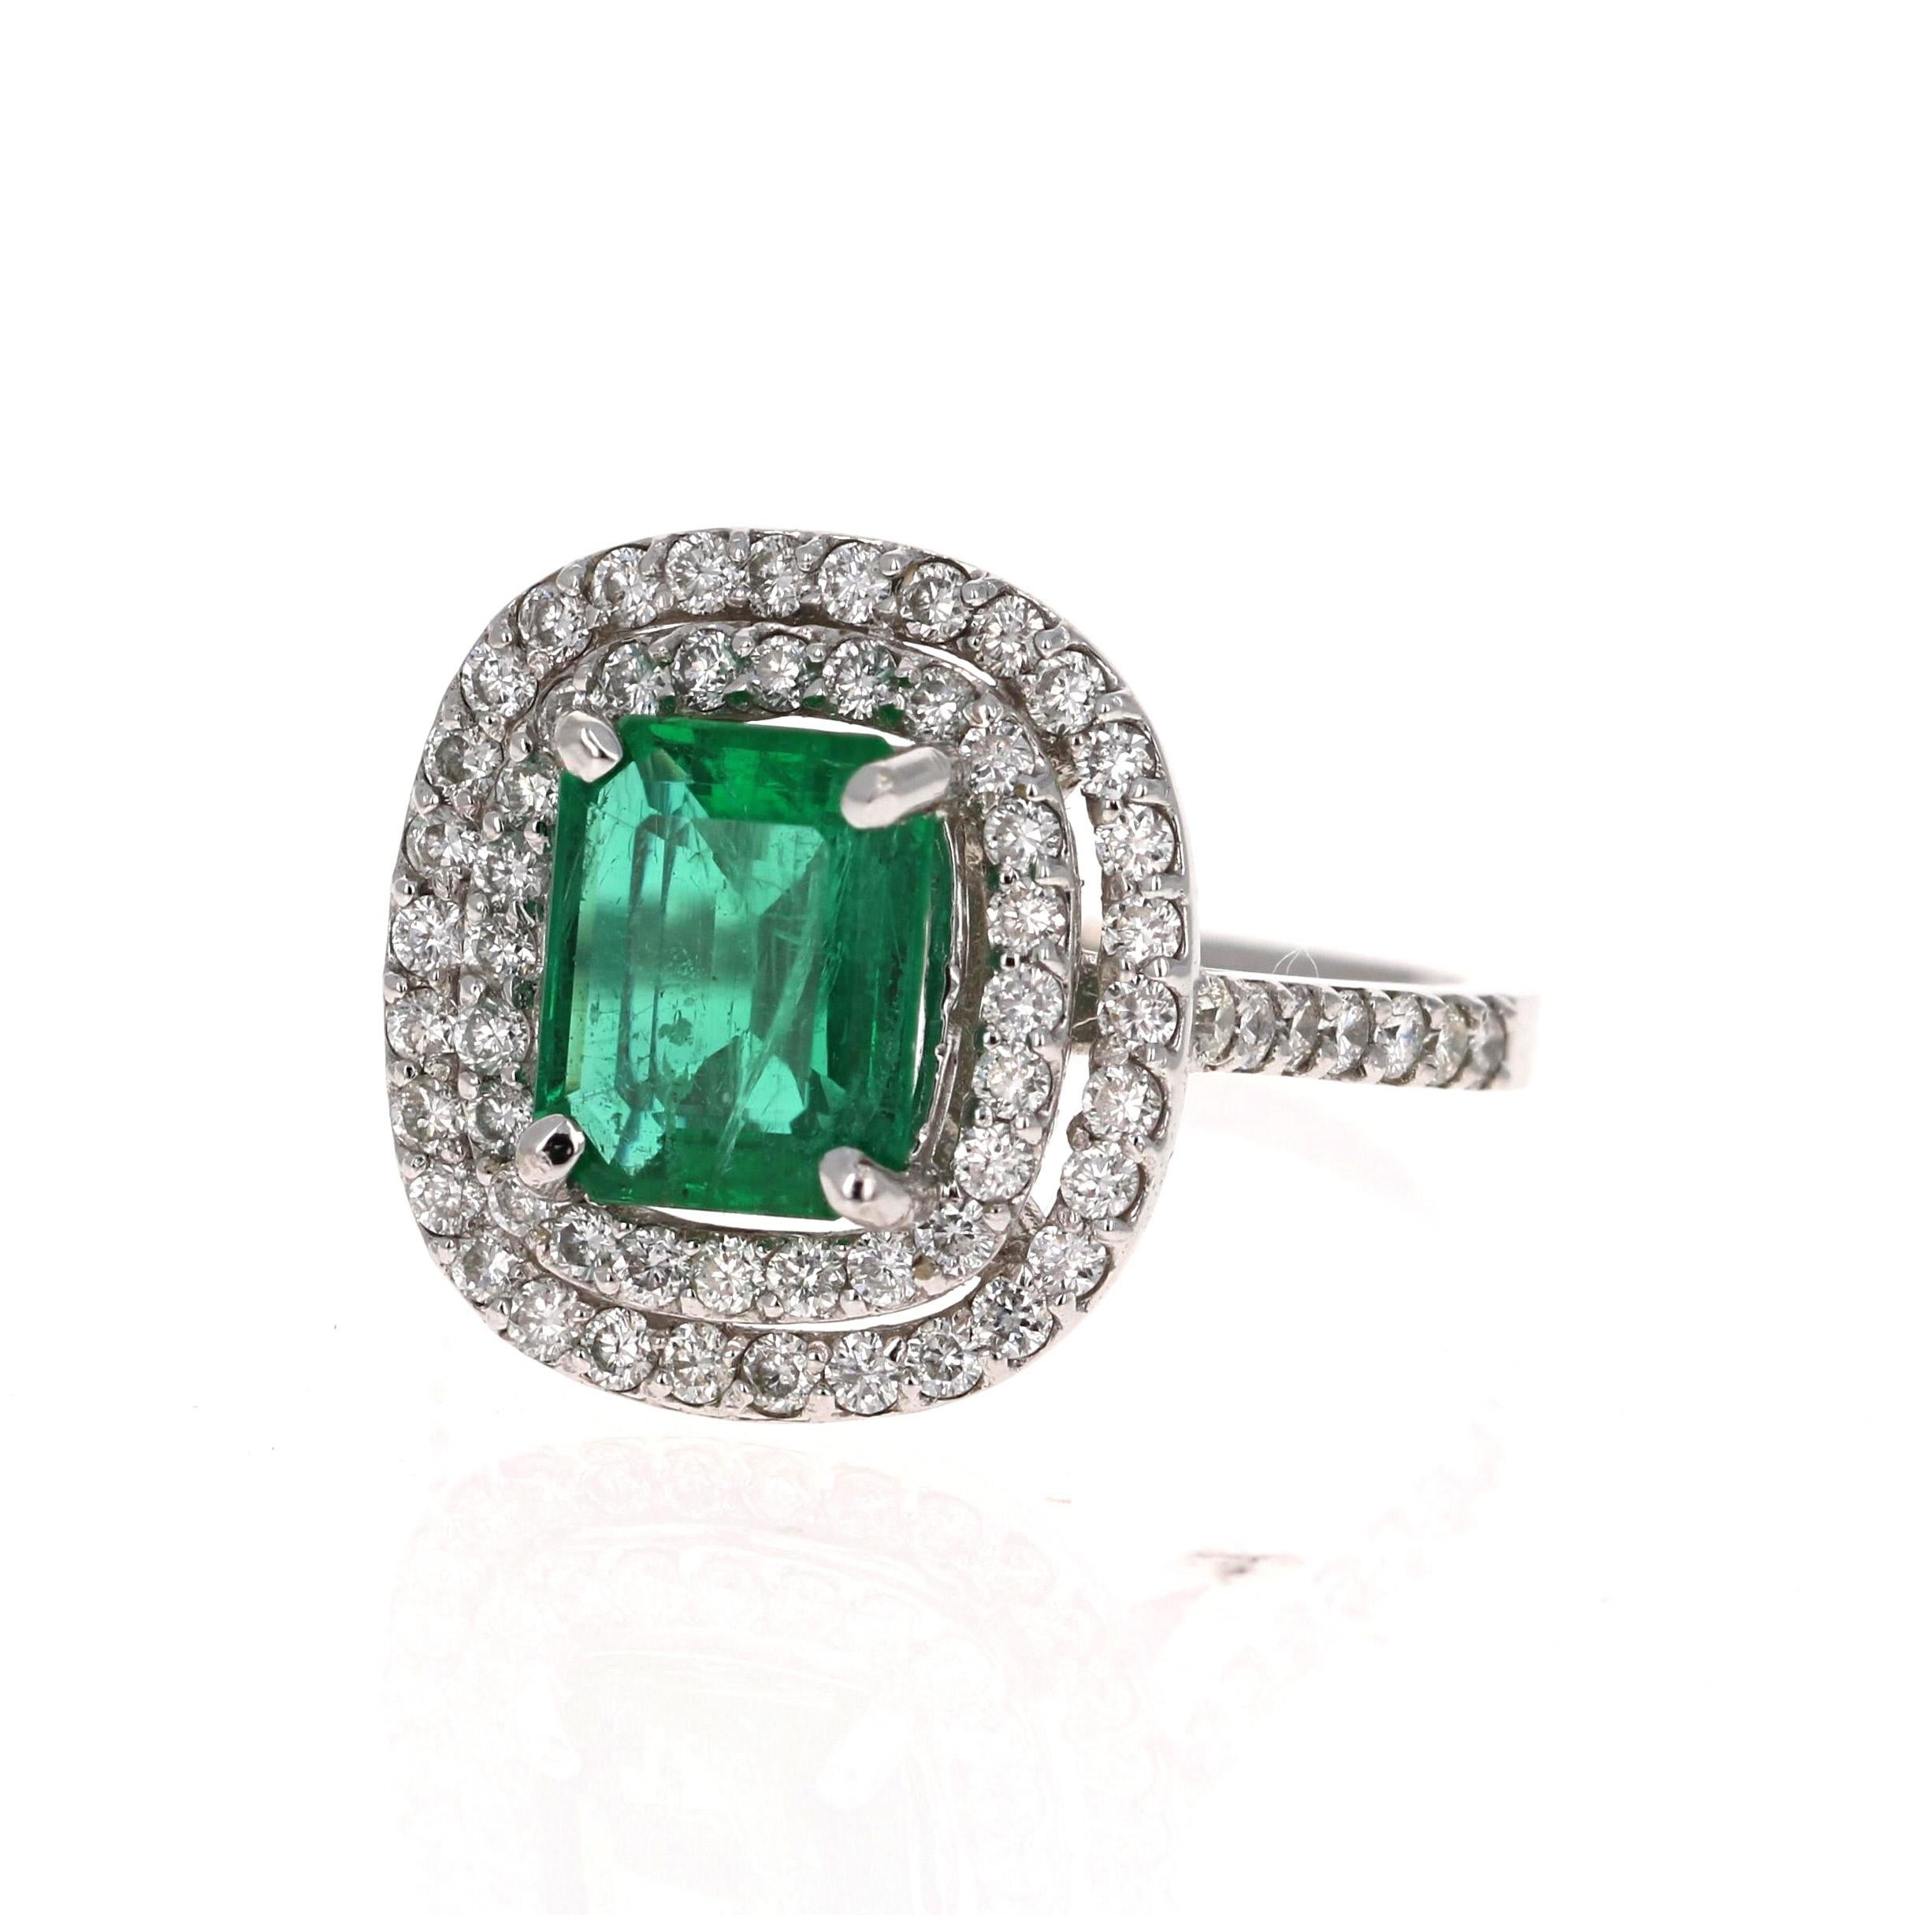 Exquisite Emerald Cut Emerald Diamond Ring! 

This Emerald ring is absolutely gorgeous. The center is an Emerald Cut Emerald which weighs 1.96 Carats and measures in at 9mm x 7mm.  The Emerald is surrounded by 68 Round Cut Diamonds weighing 0.90